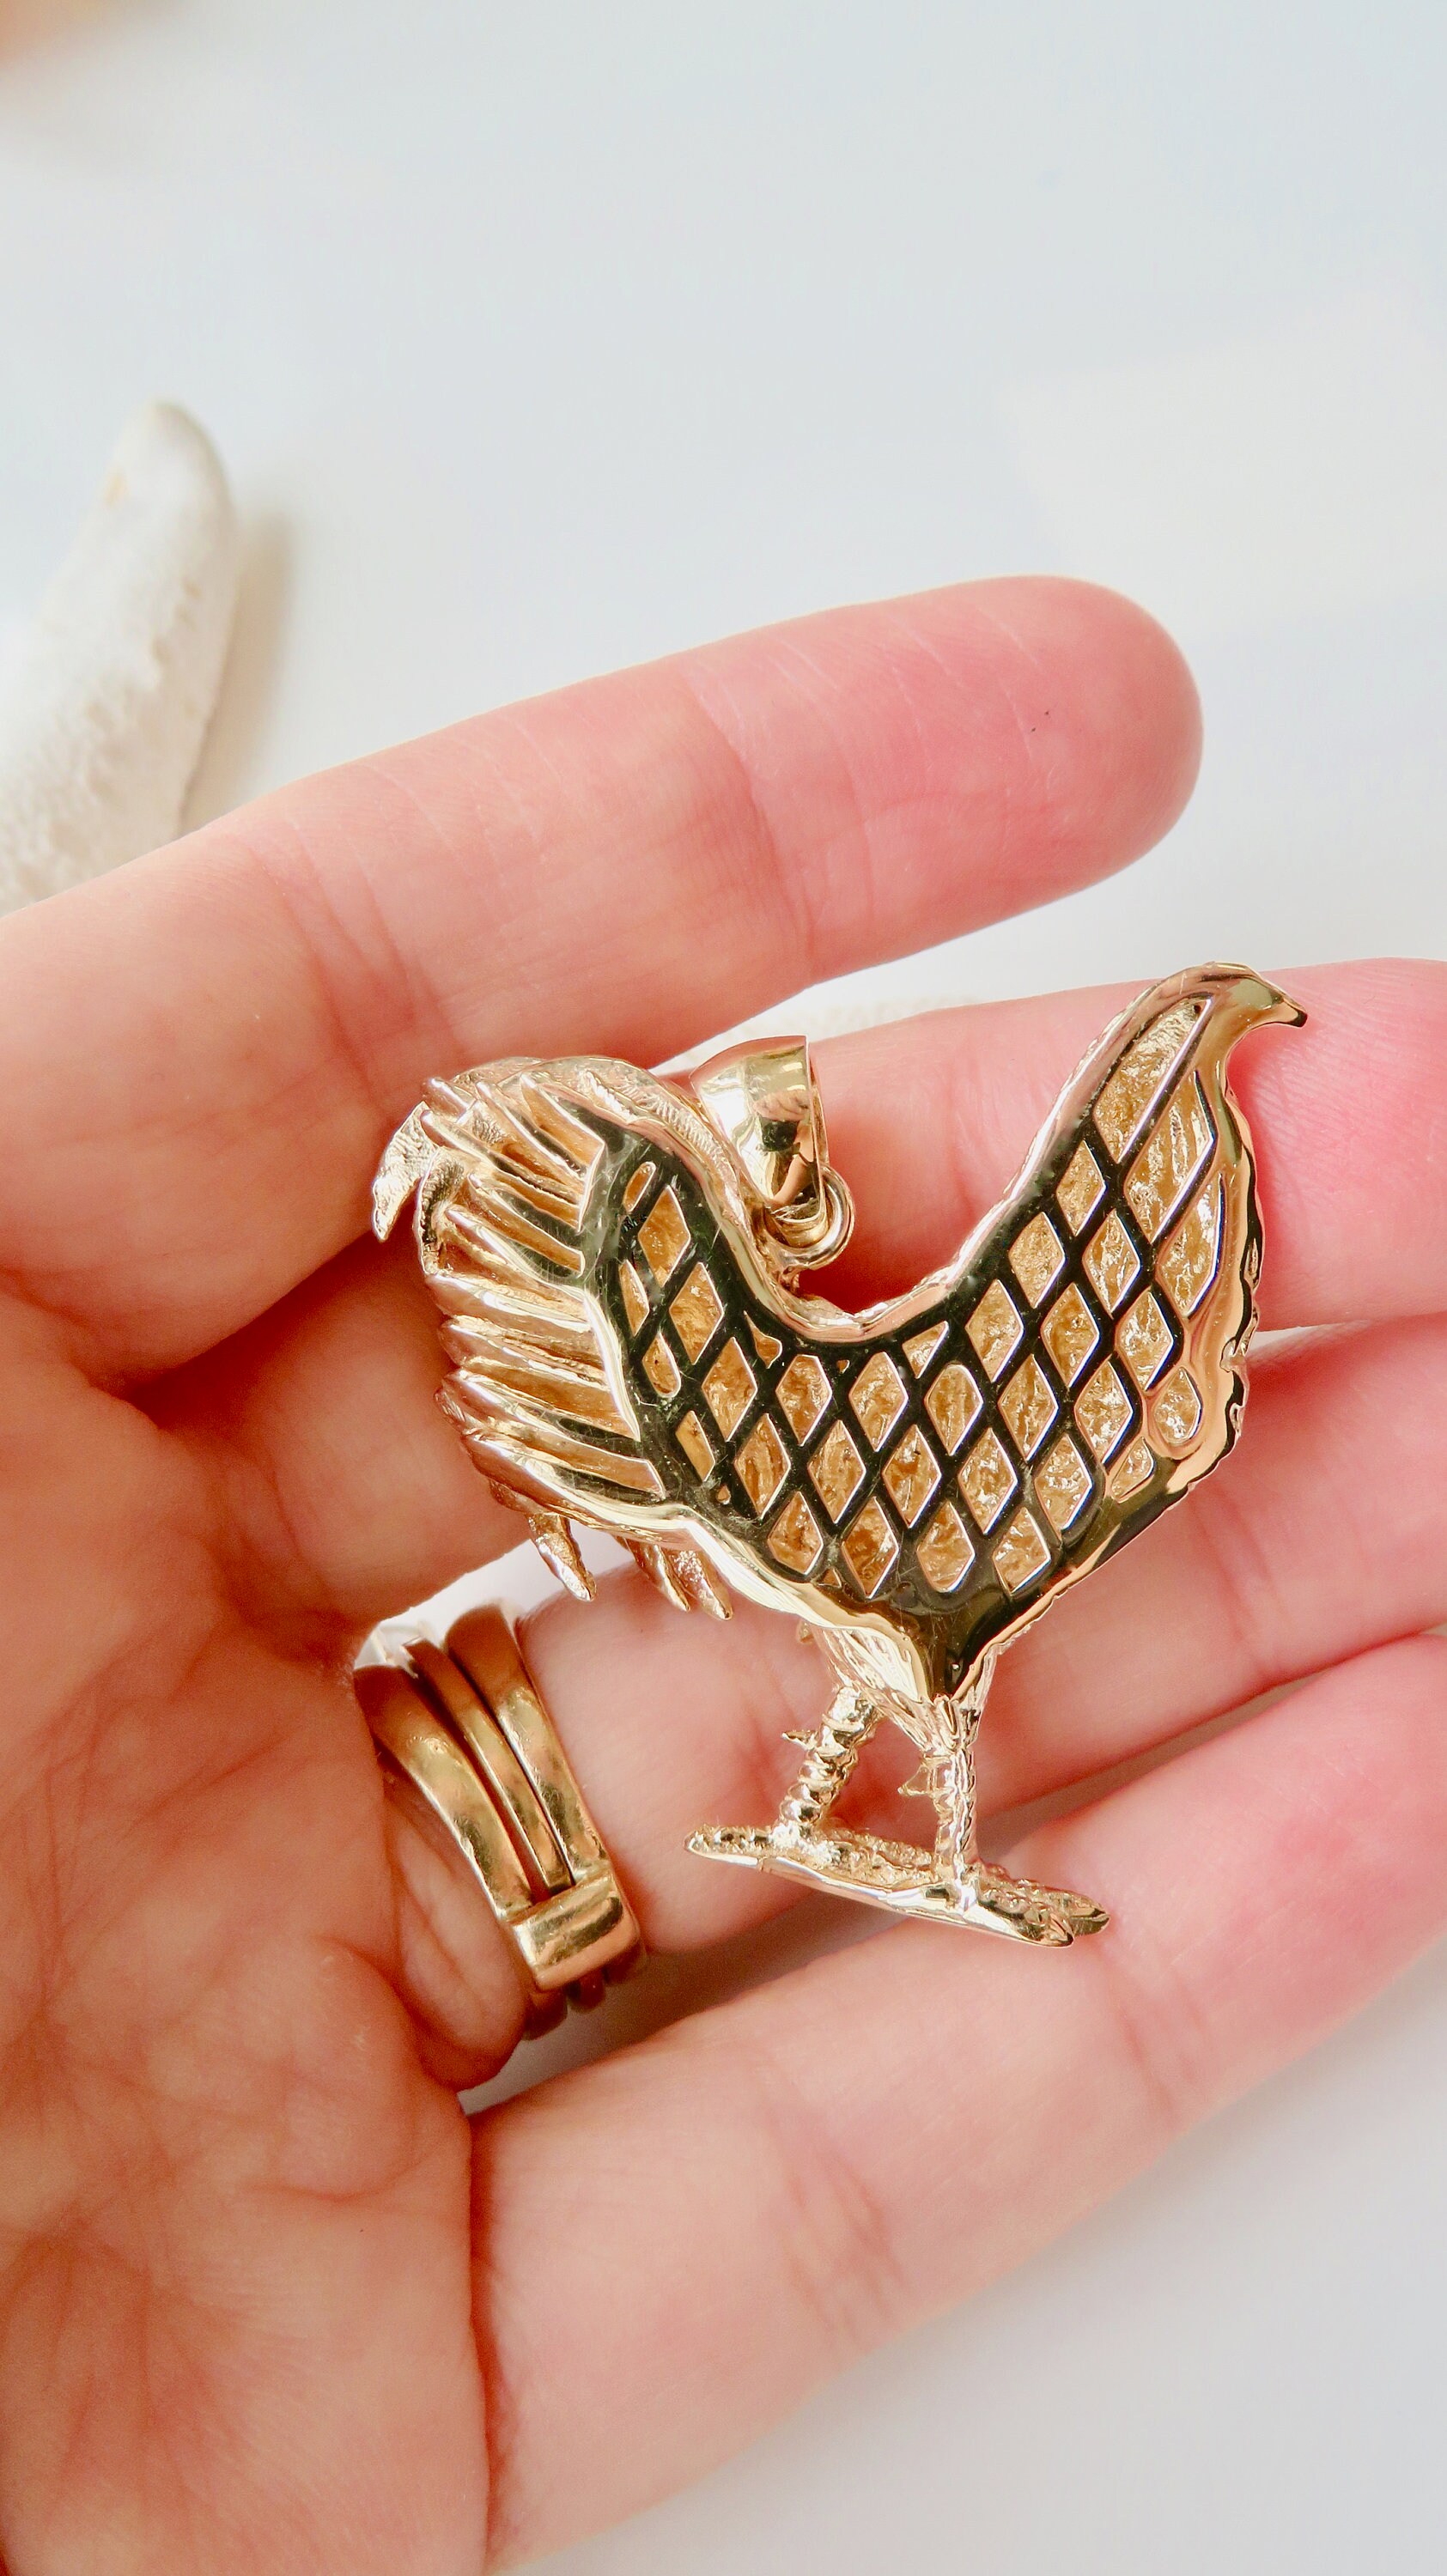  Honbay 40PCS Alloy Chicken Charms Pendant Rooster